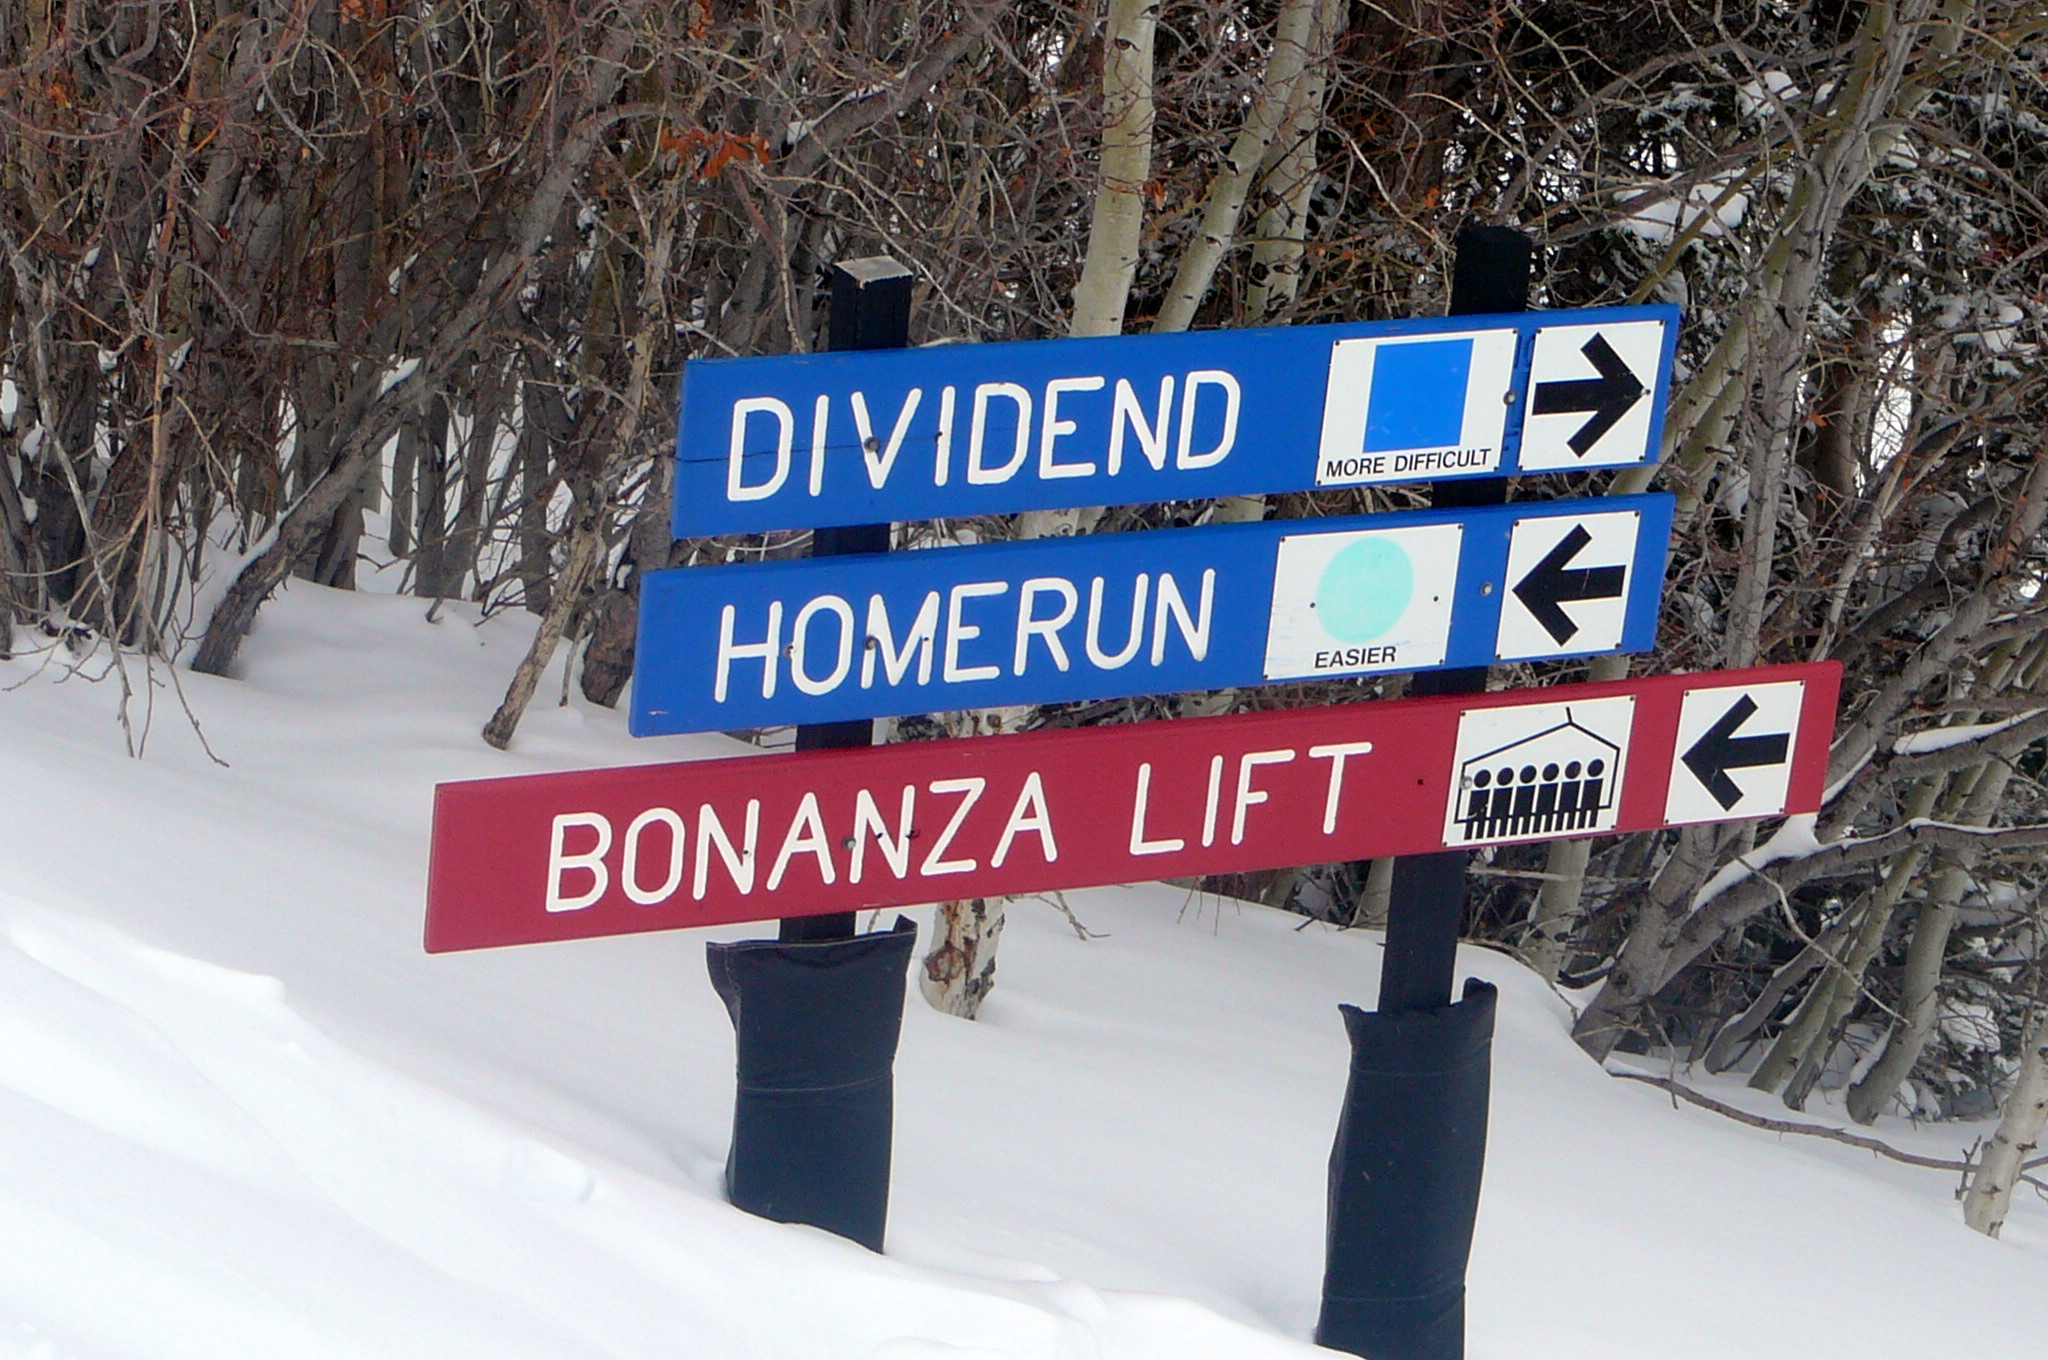 blue and red molded fiberglass trail run signs 